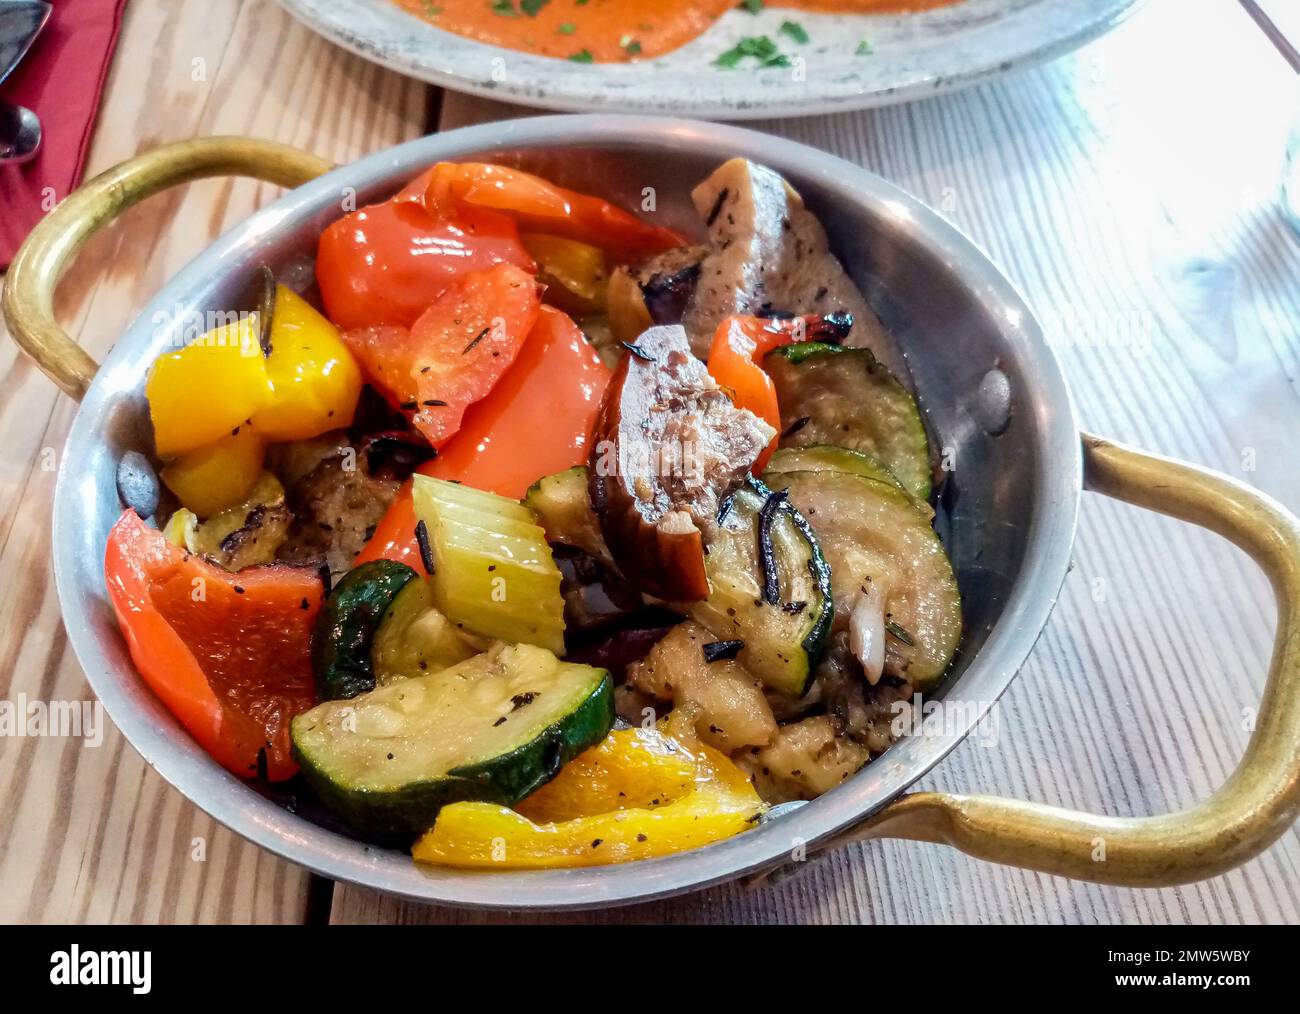 Italian cooked vegetable dish place on the restaurant dining table. Stock Photo